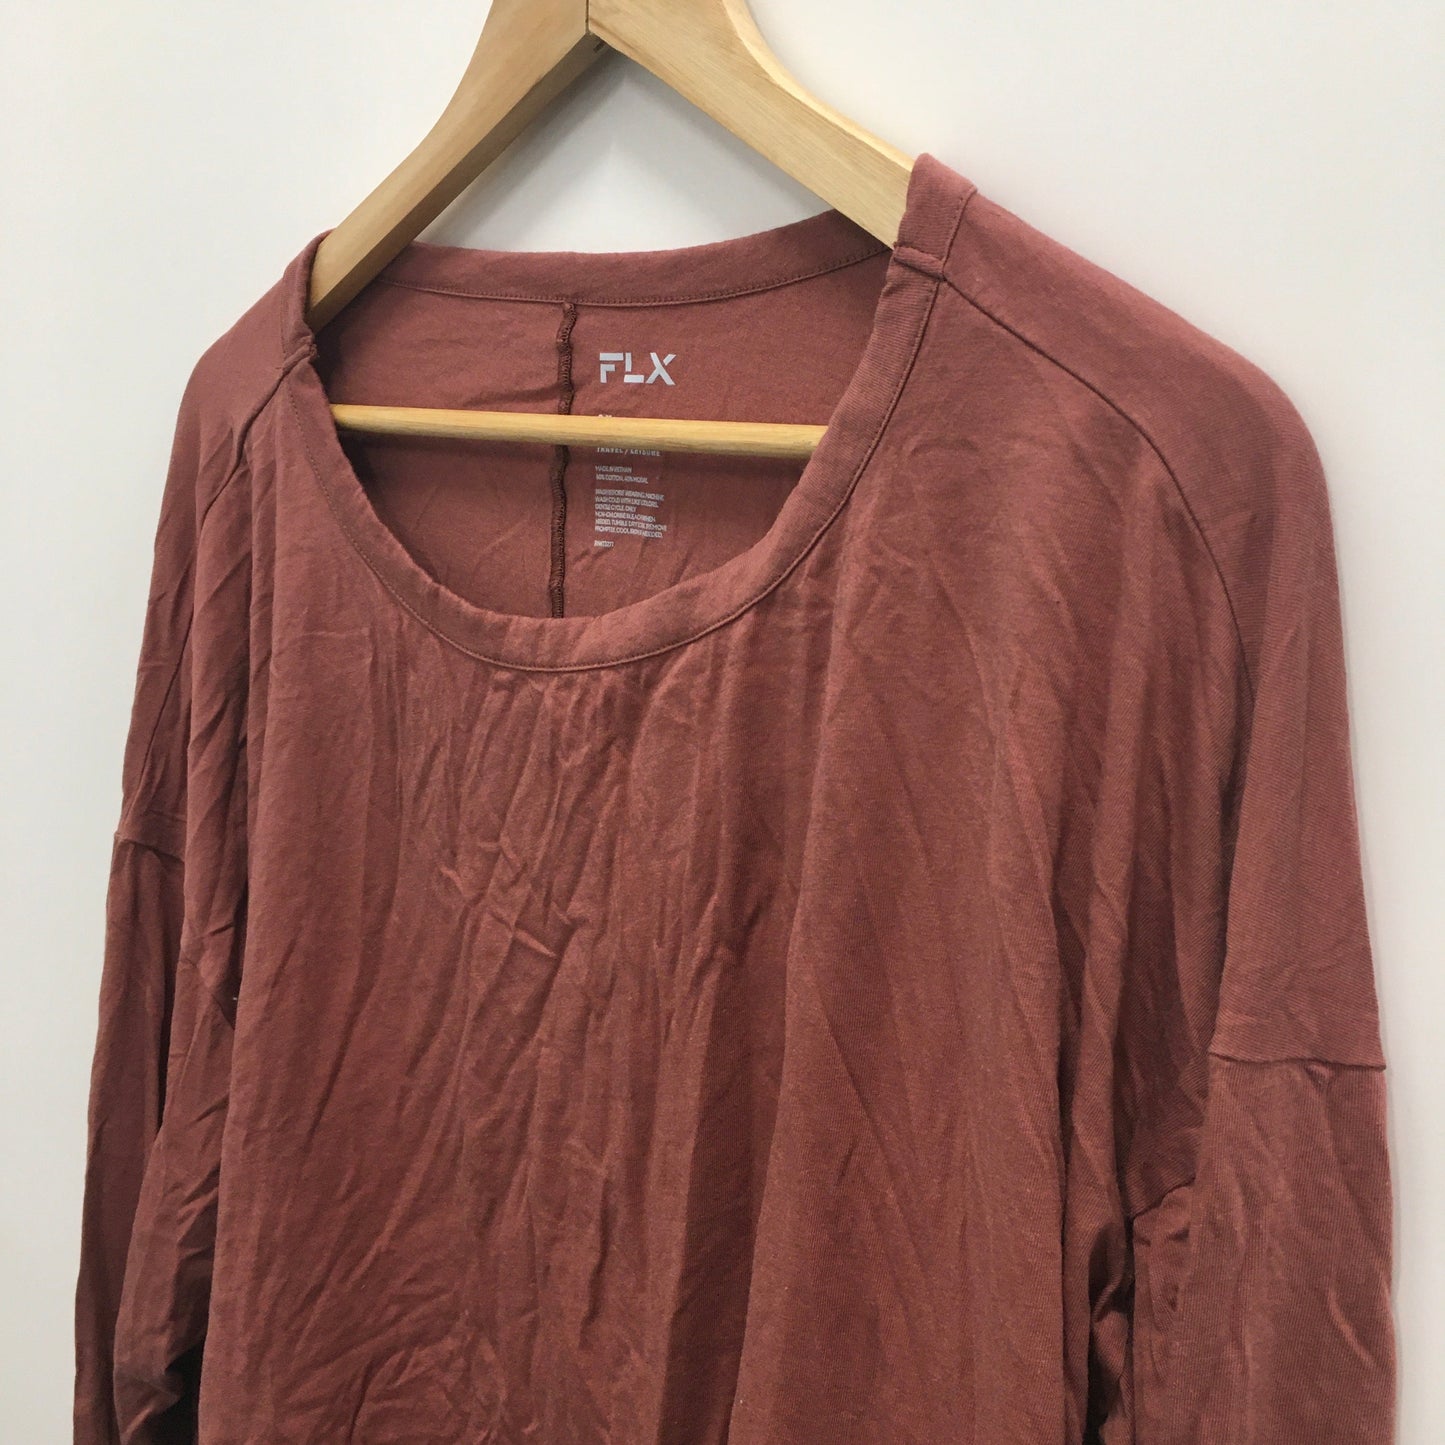 Top Long Sleeve Basic By Clothes Mentor  Size: 2x